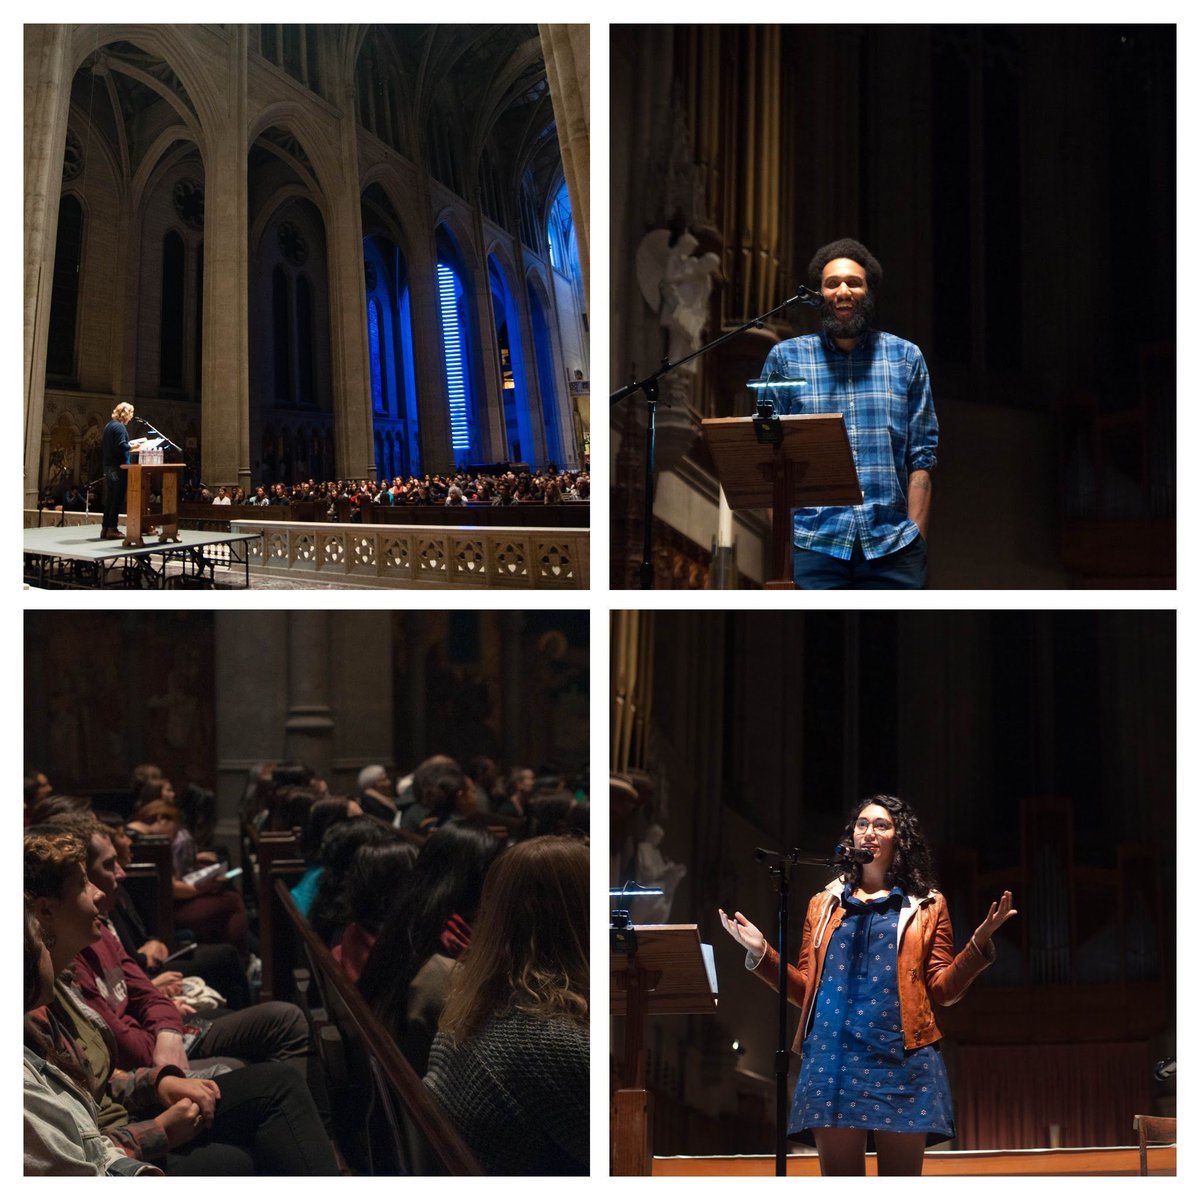 Join us next Saturday 4/13 at @gracecathedral for FREE poetry in the pews by @brendalhillman @cathyparkhong @PoetDongLi @BTTierney85 curated by @powell_da @Pscripturient Signing & sales to follow w @greenapplebooks More info here: buff.ly/3PNL8Vg